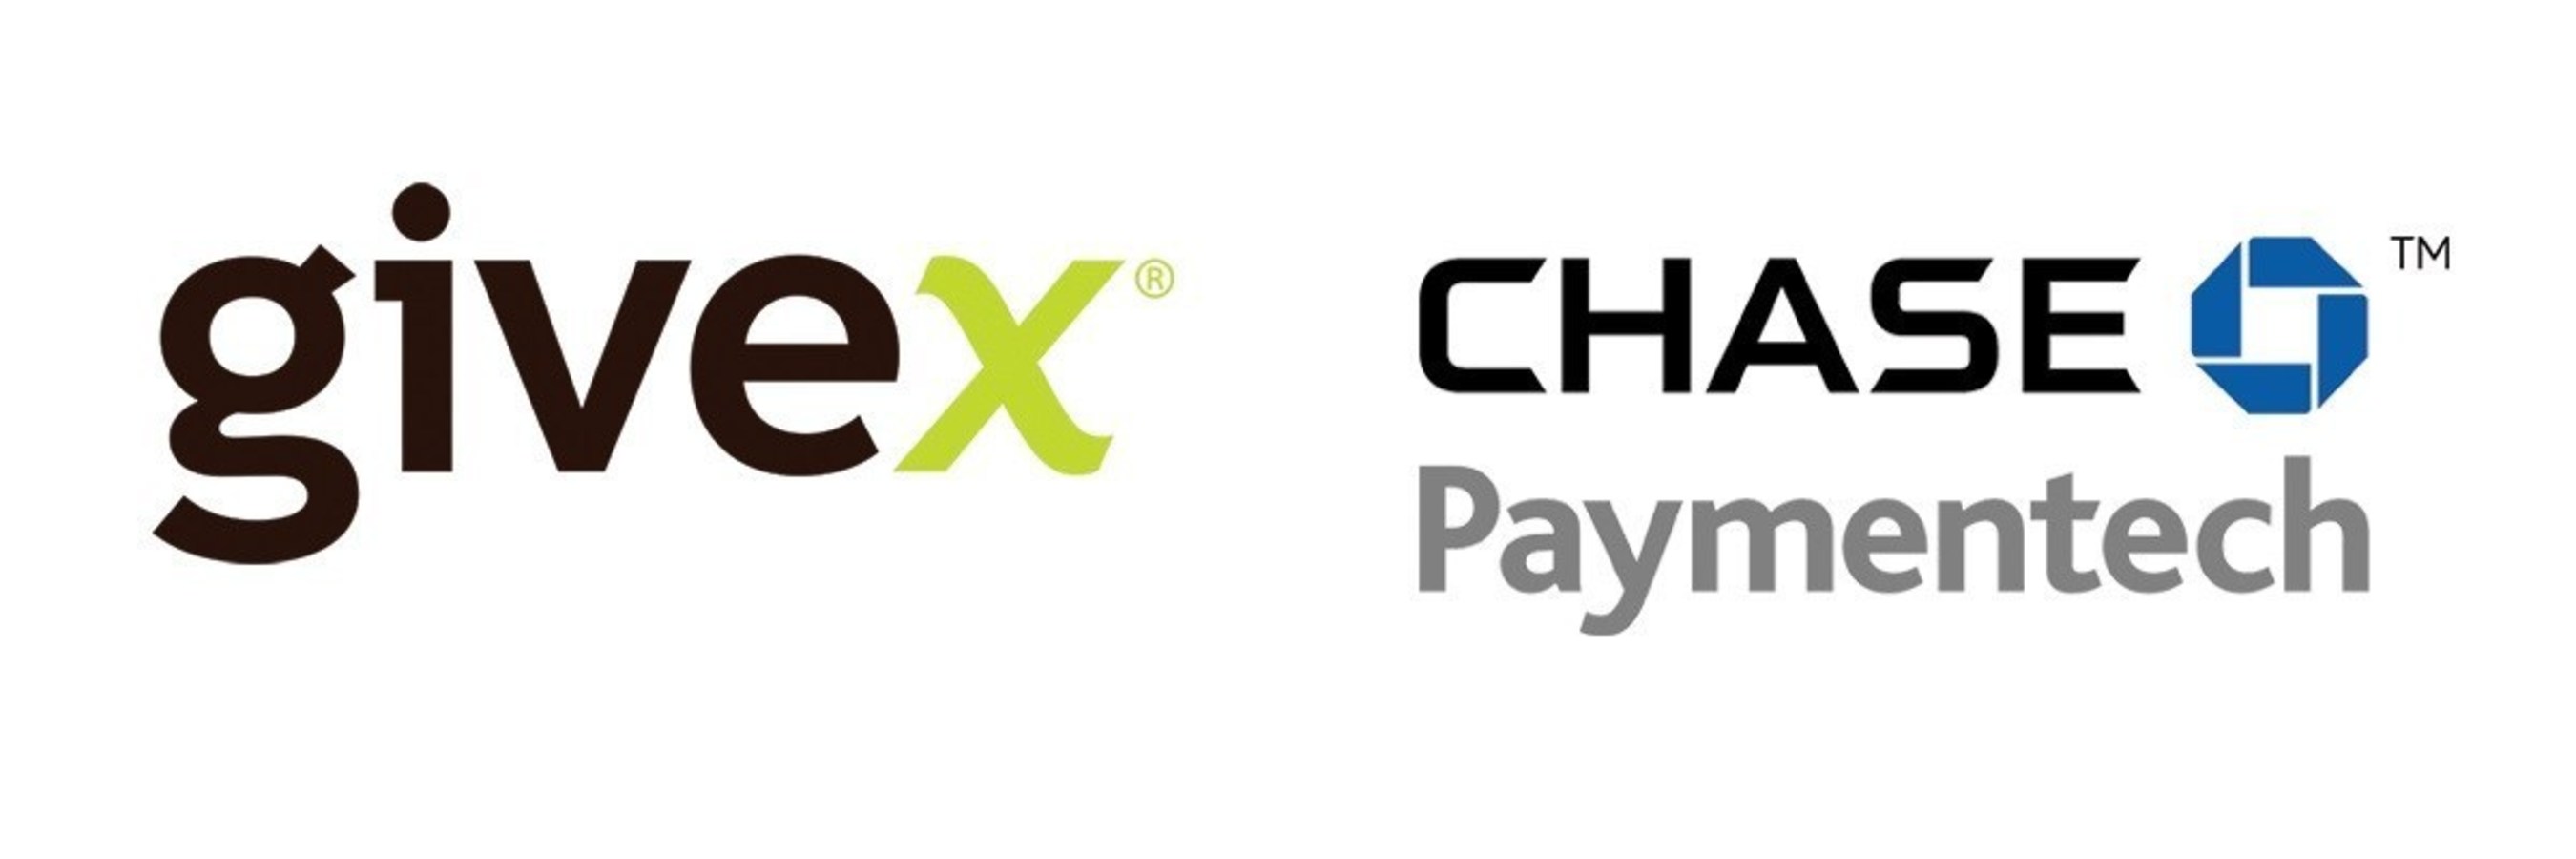 Givex acquires Chase Paymentech's Gift Card Business